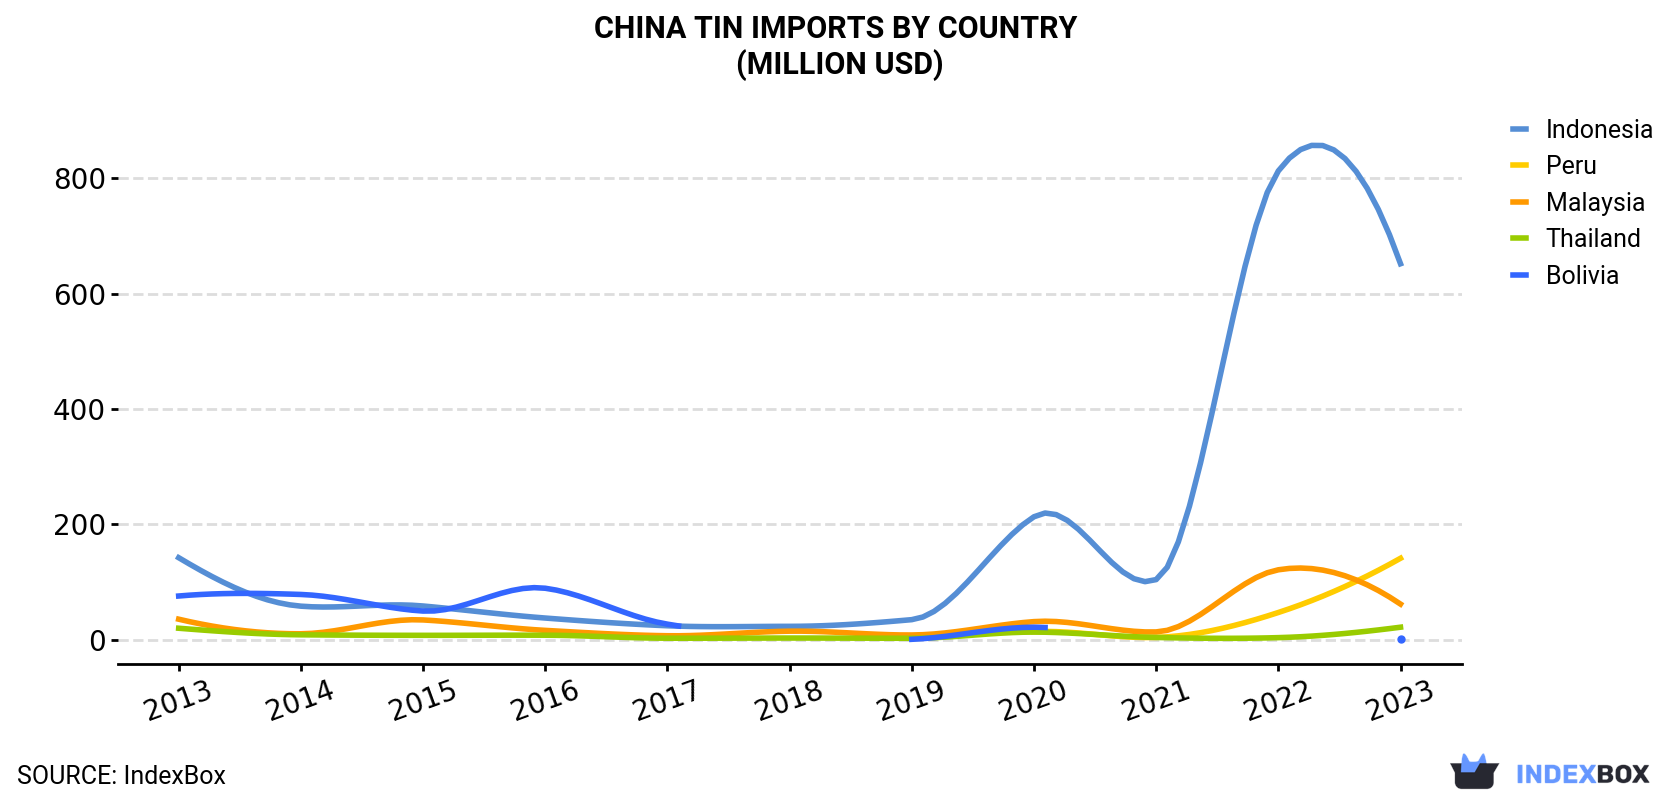 China Tin Imports By Country (Million USD)